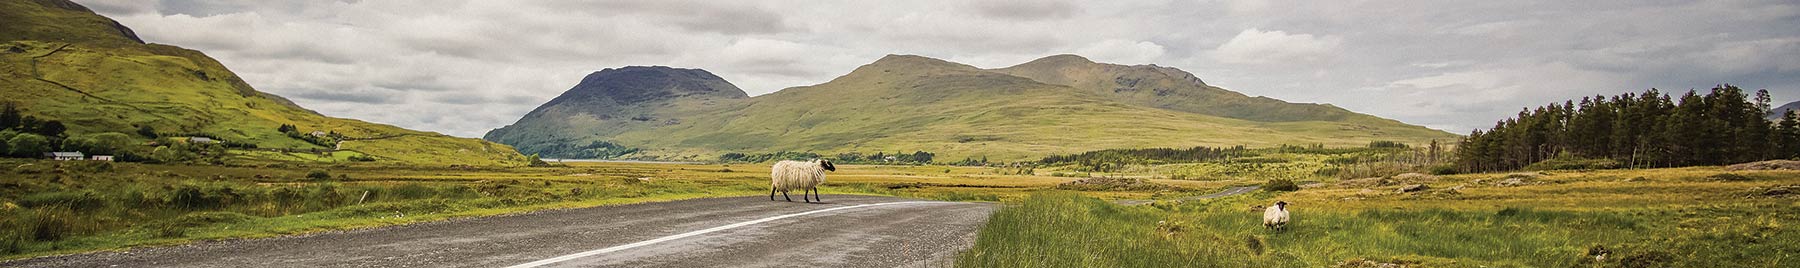 landscape of Ireland with a two sheep near a remote road